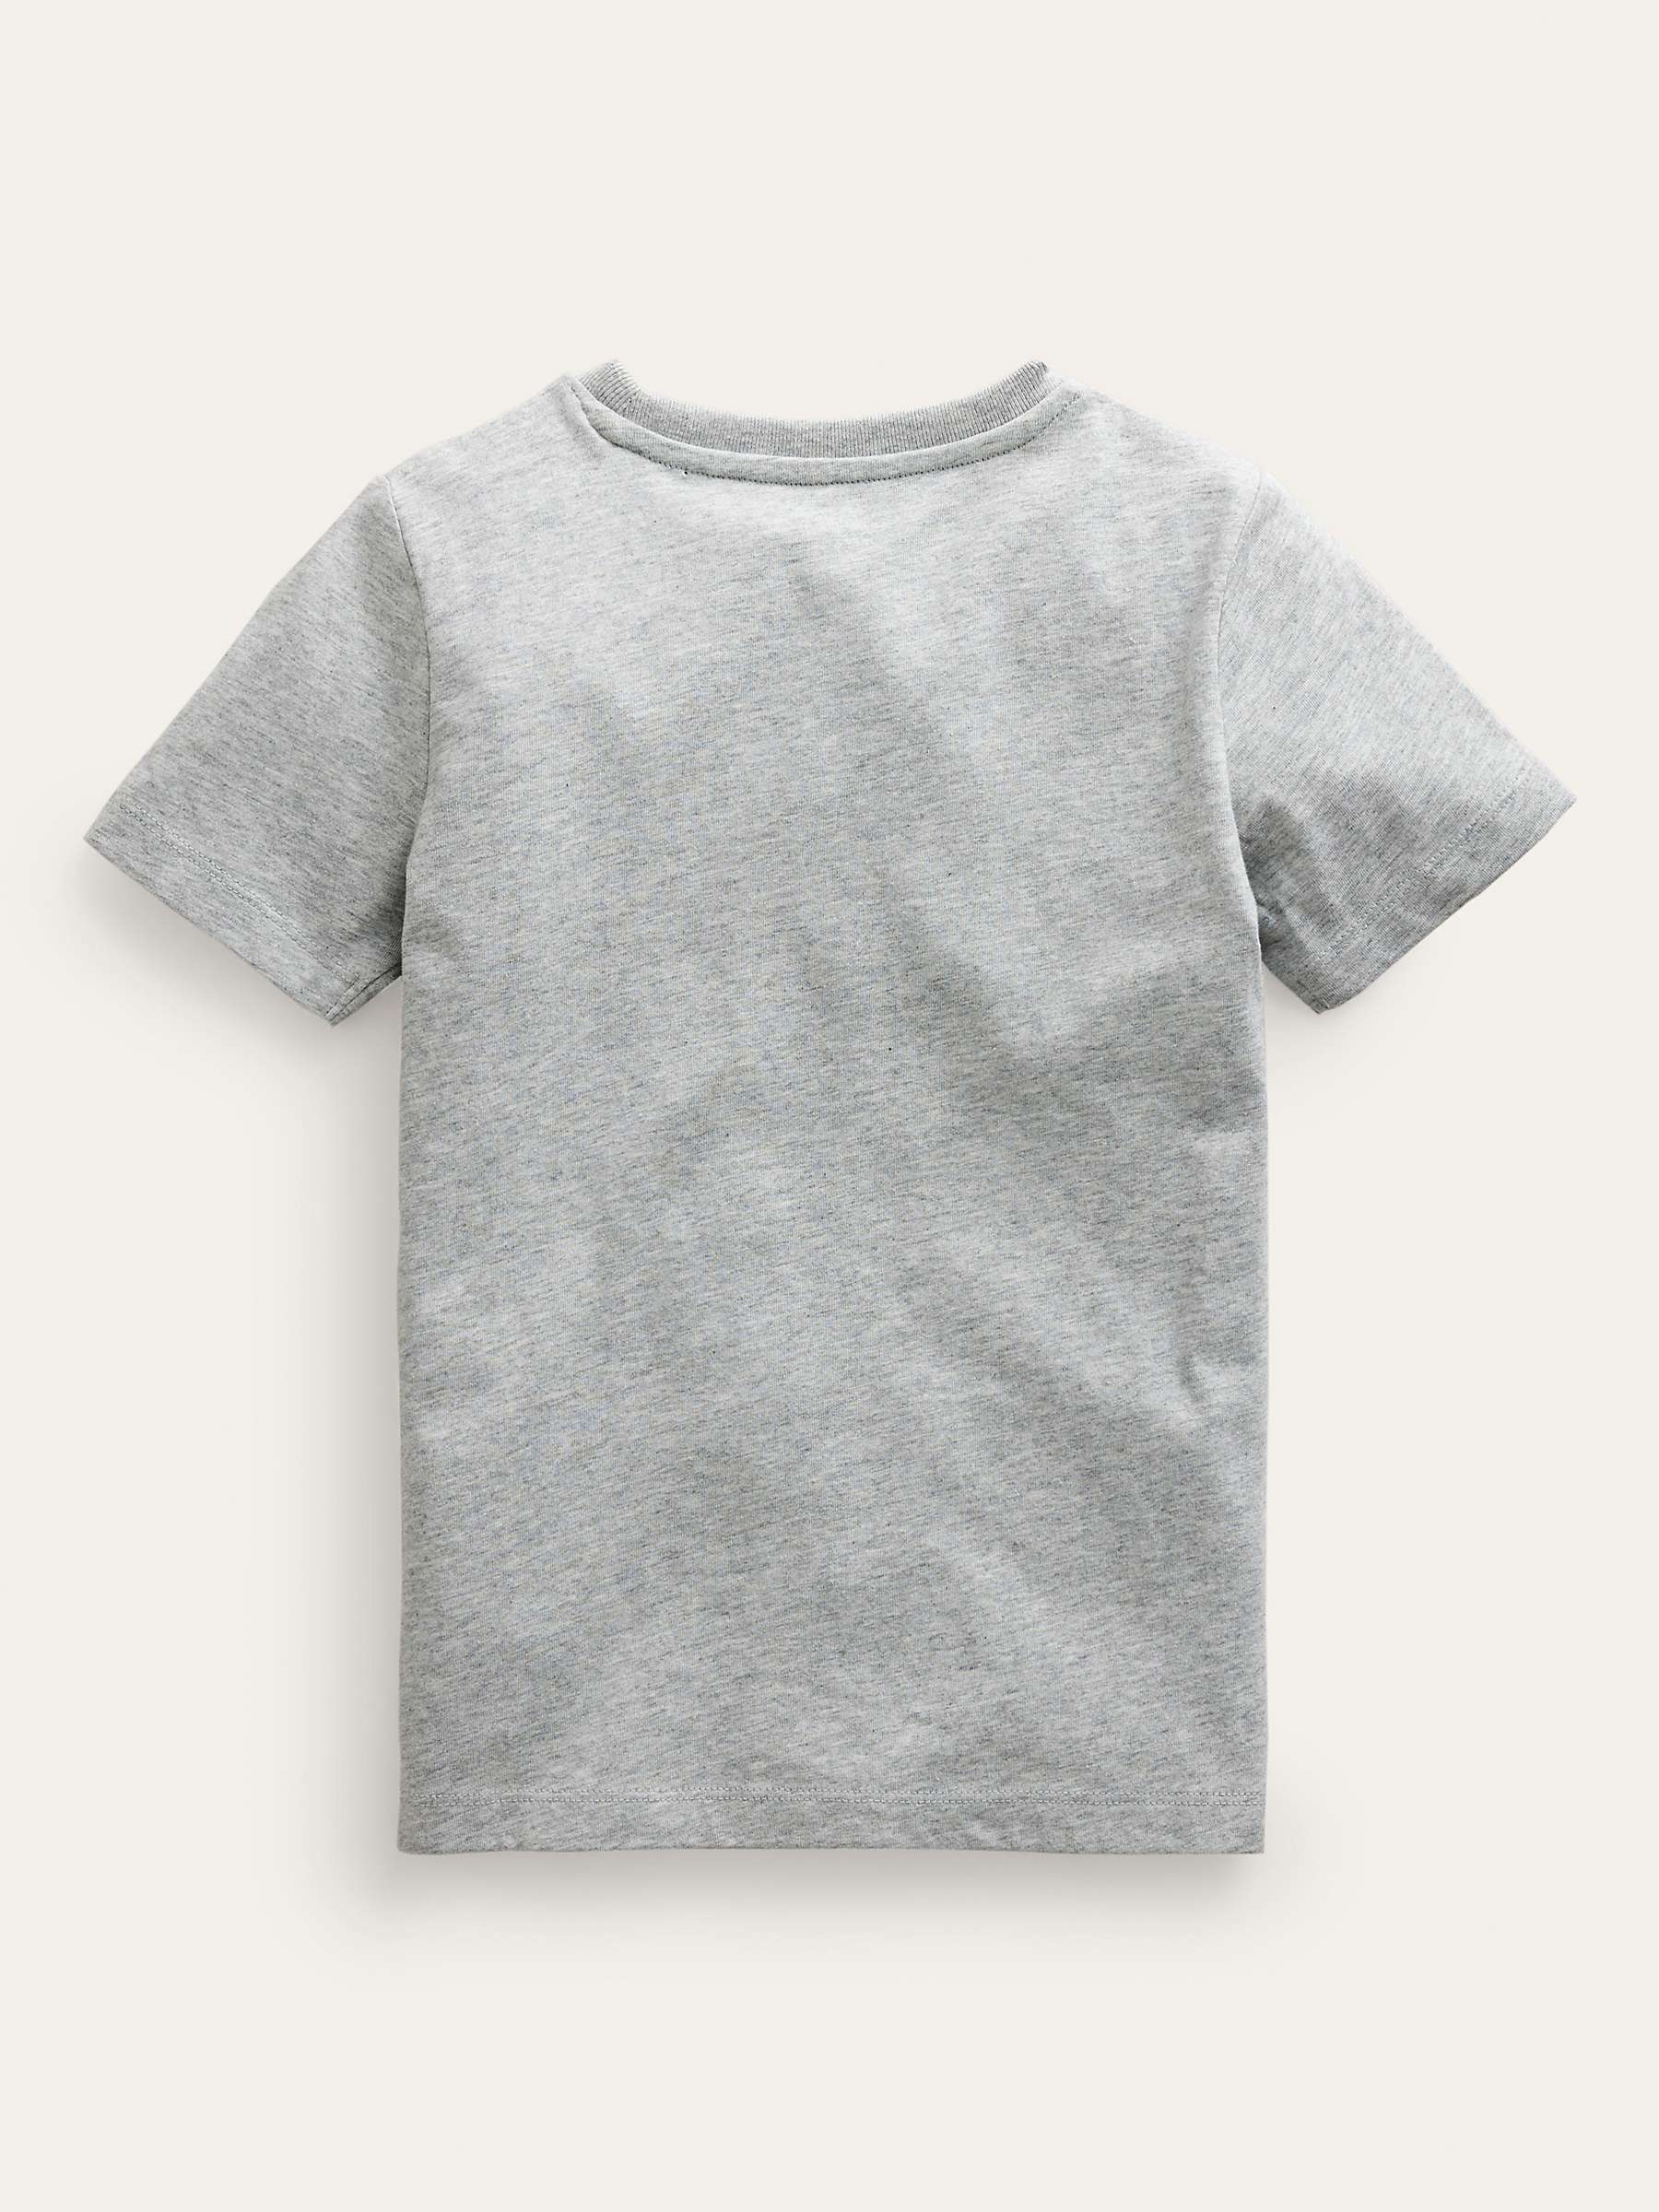 Buy Mini Boden Kids' Glow-In-The-Dark Space Educational T-Shirt Online at johnlewis.com